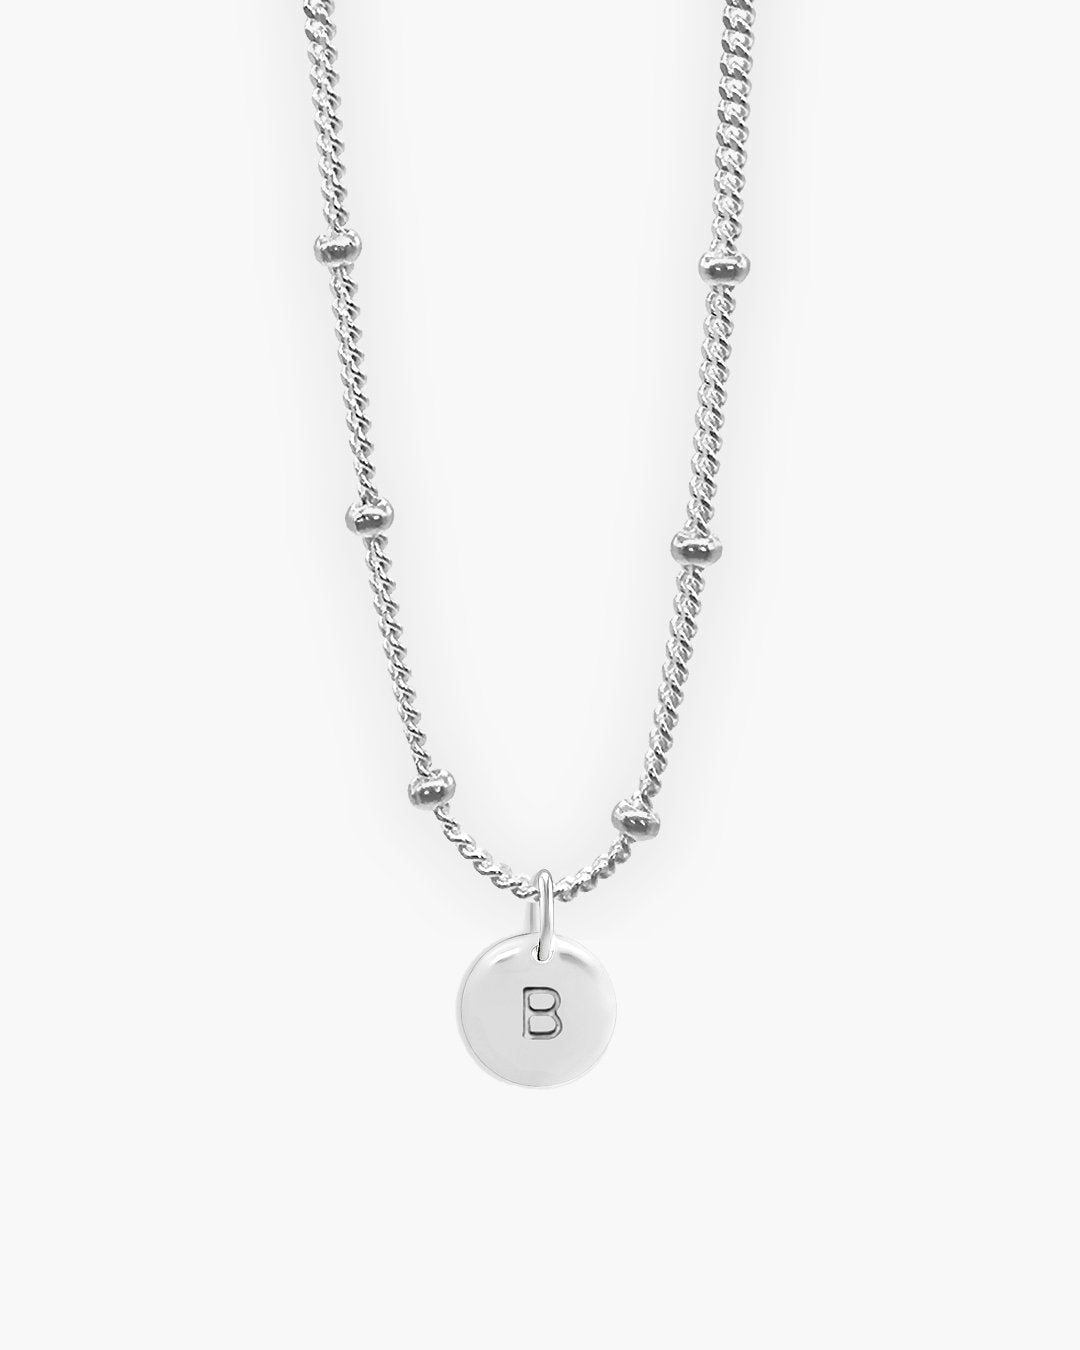 Silver Round Love Letter B Necklace